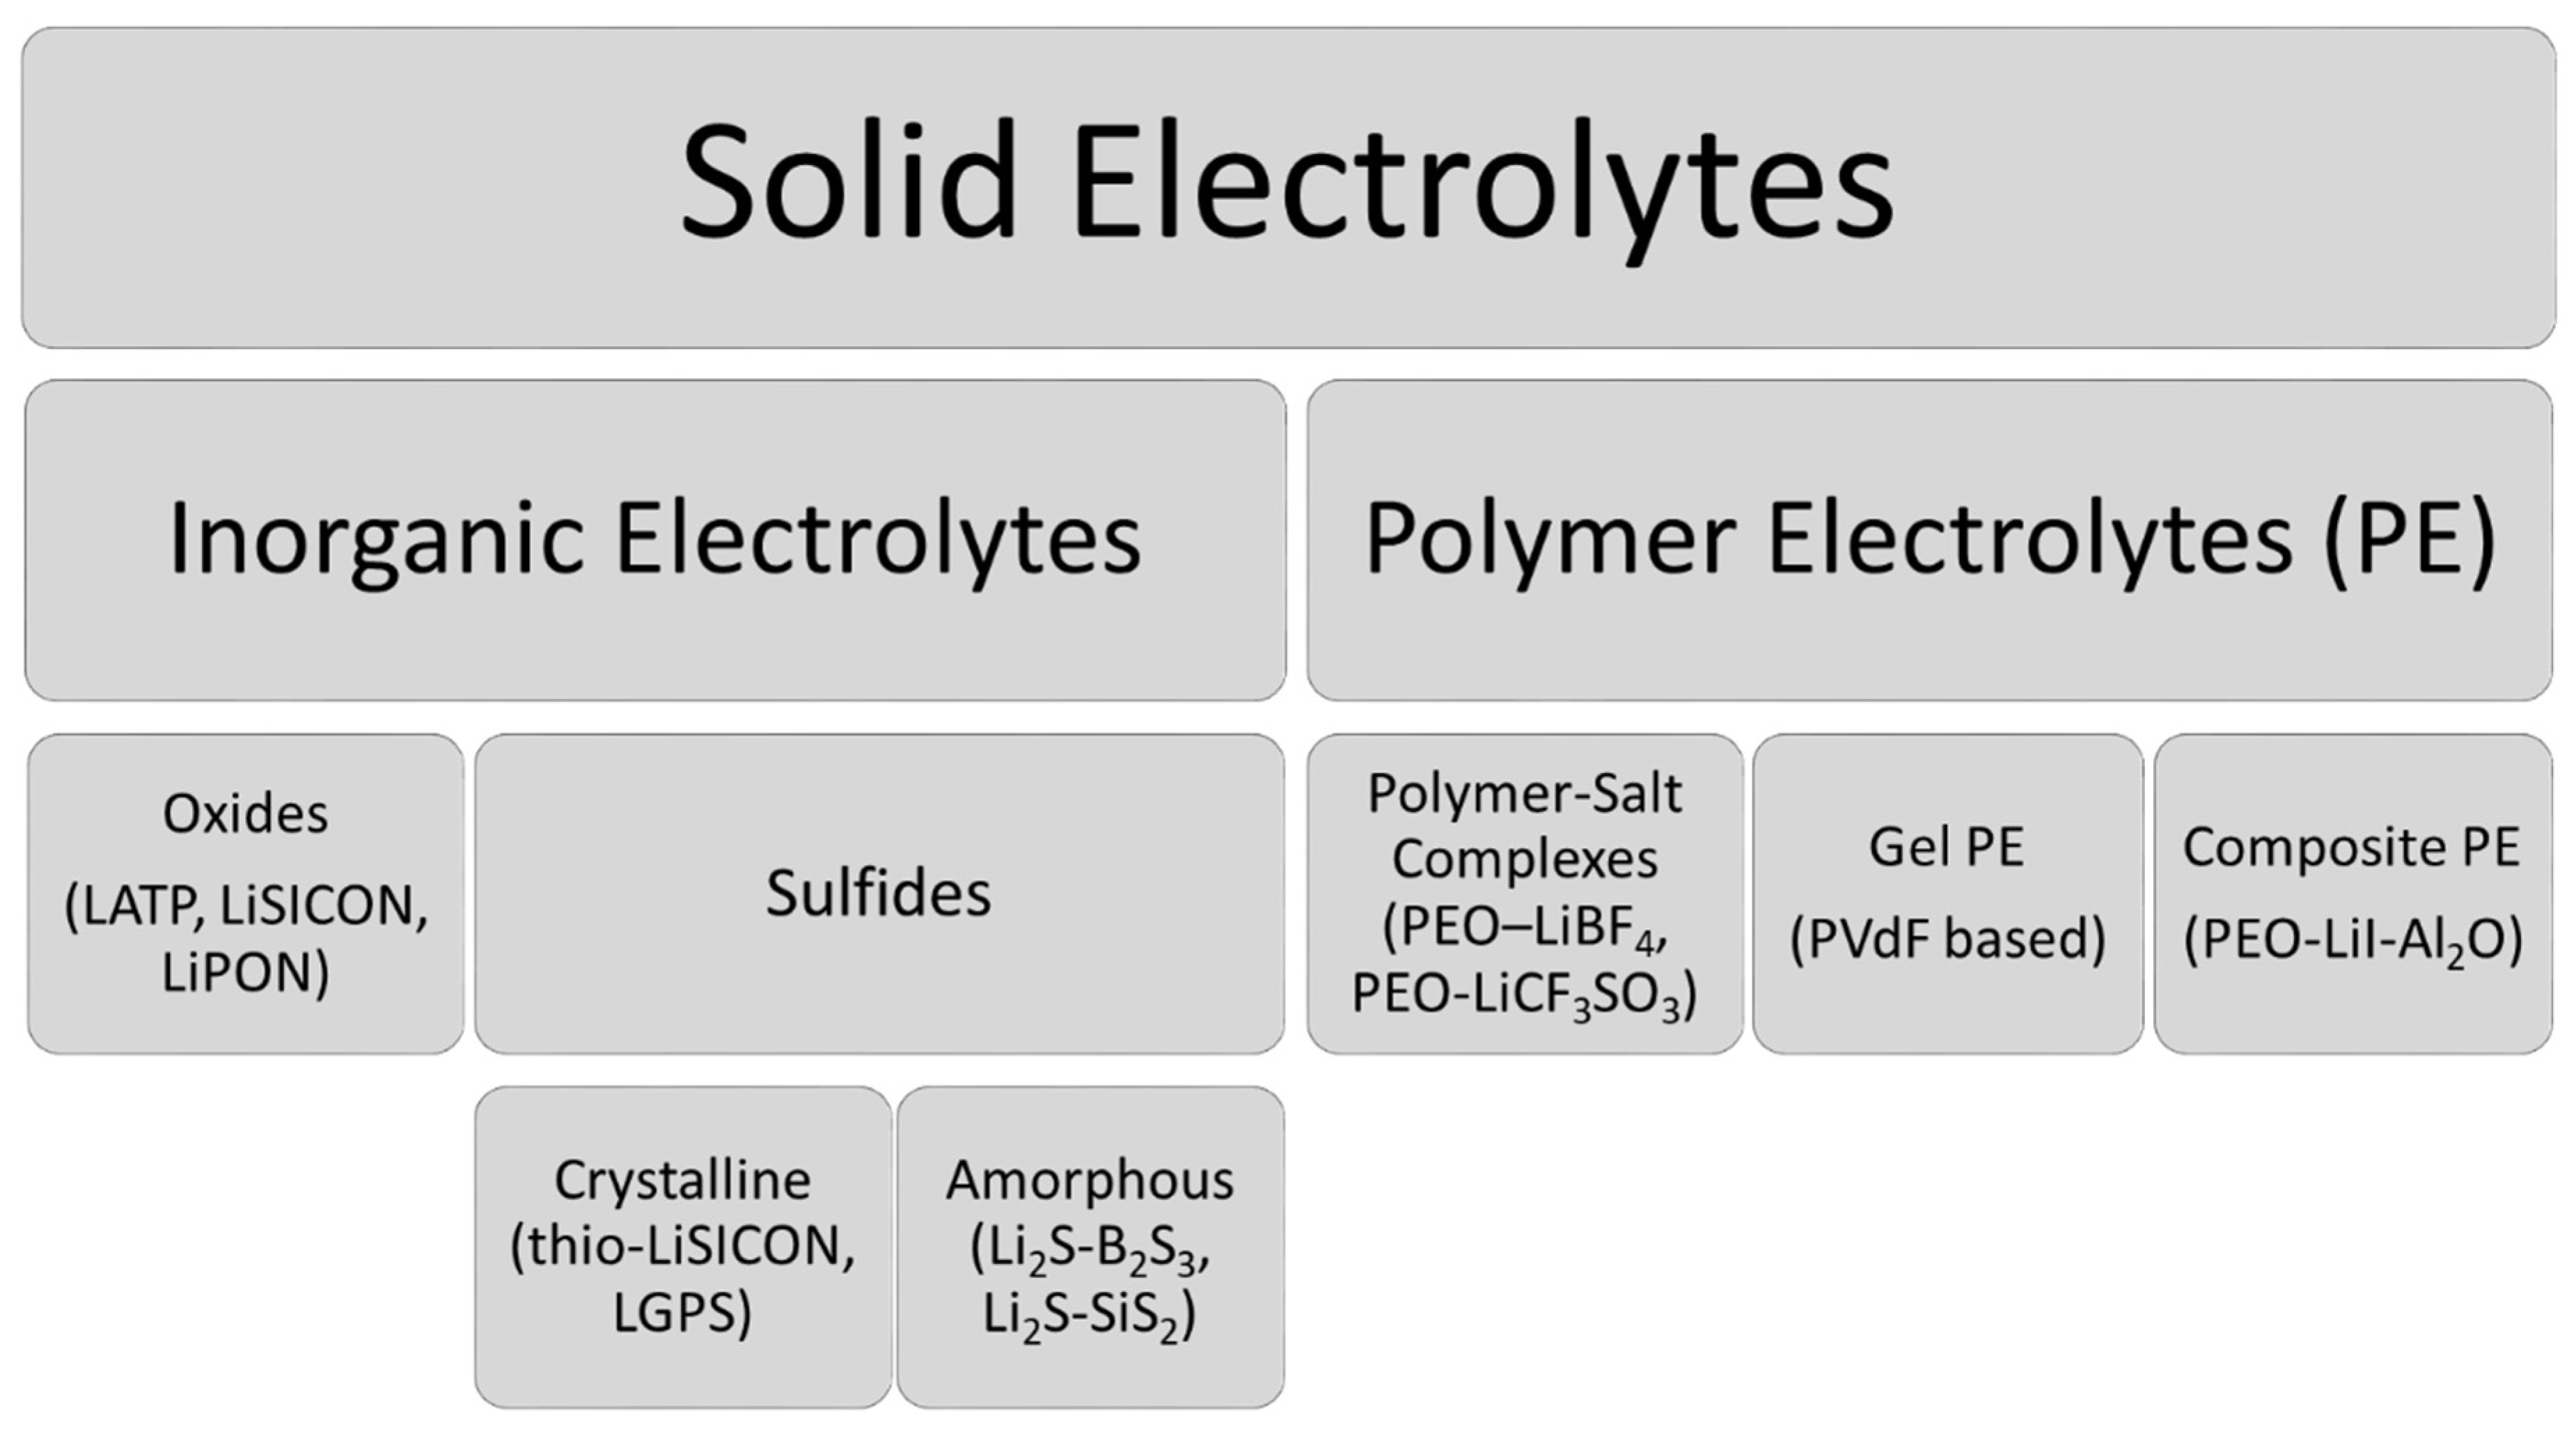 Batteries Free Full Text A Performance And Cost Overview Of Selected Solid State Electrolytes Race Between Polymer Electrolytes And Inorganic Sulfide Electrolytes Html